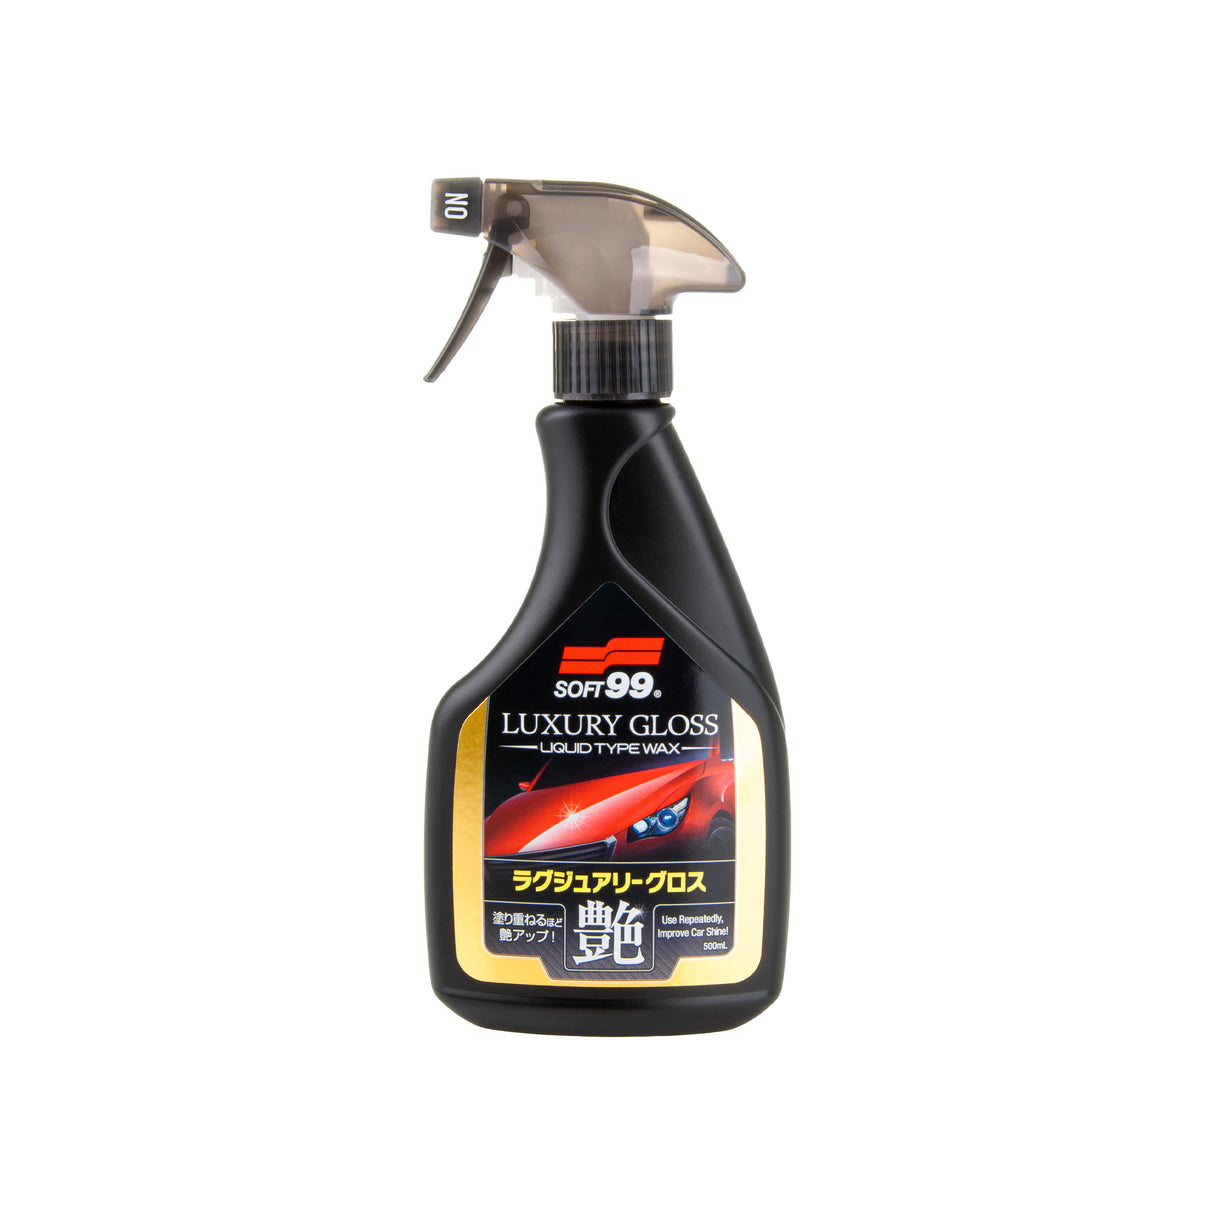 SOFT99 Luxury Gloss Quick Detailer 500ml | Shop at Just Car Care